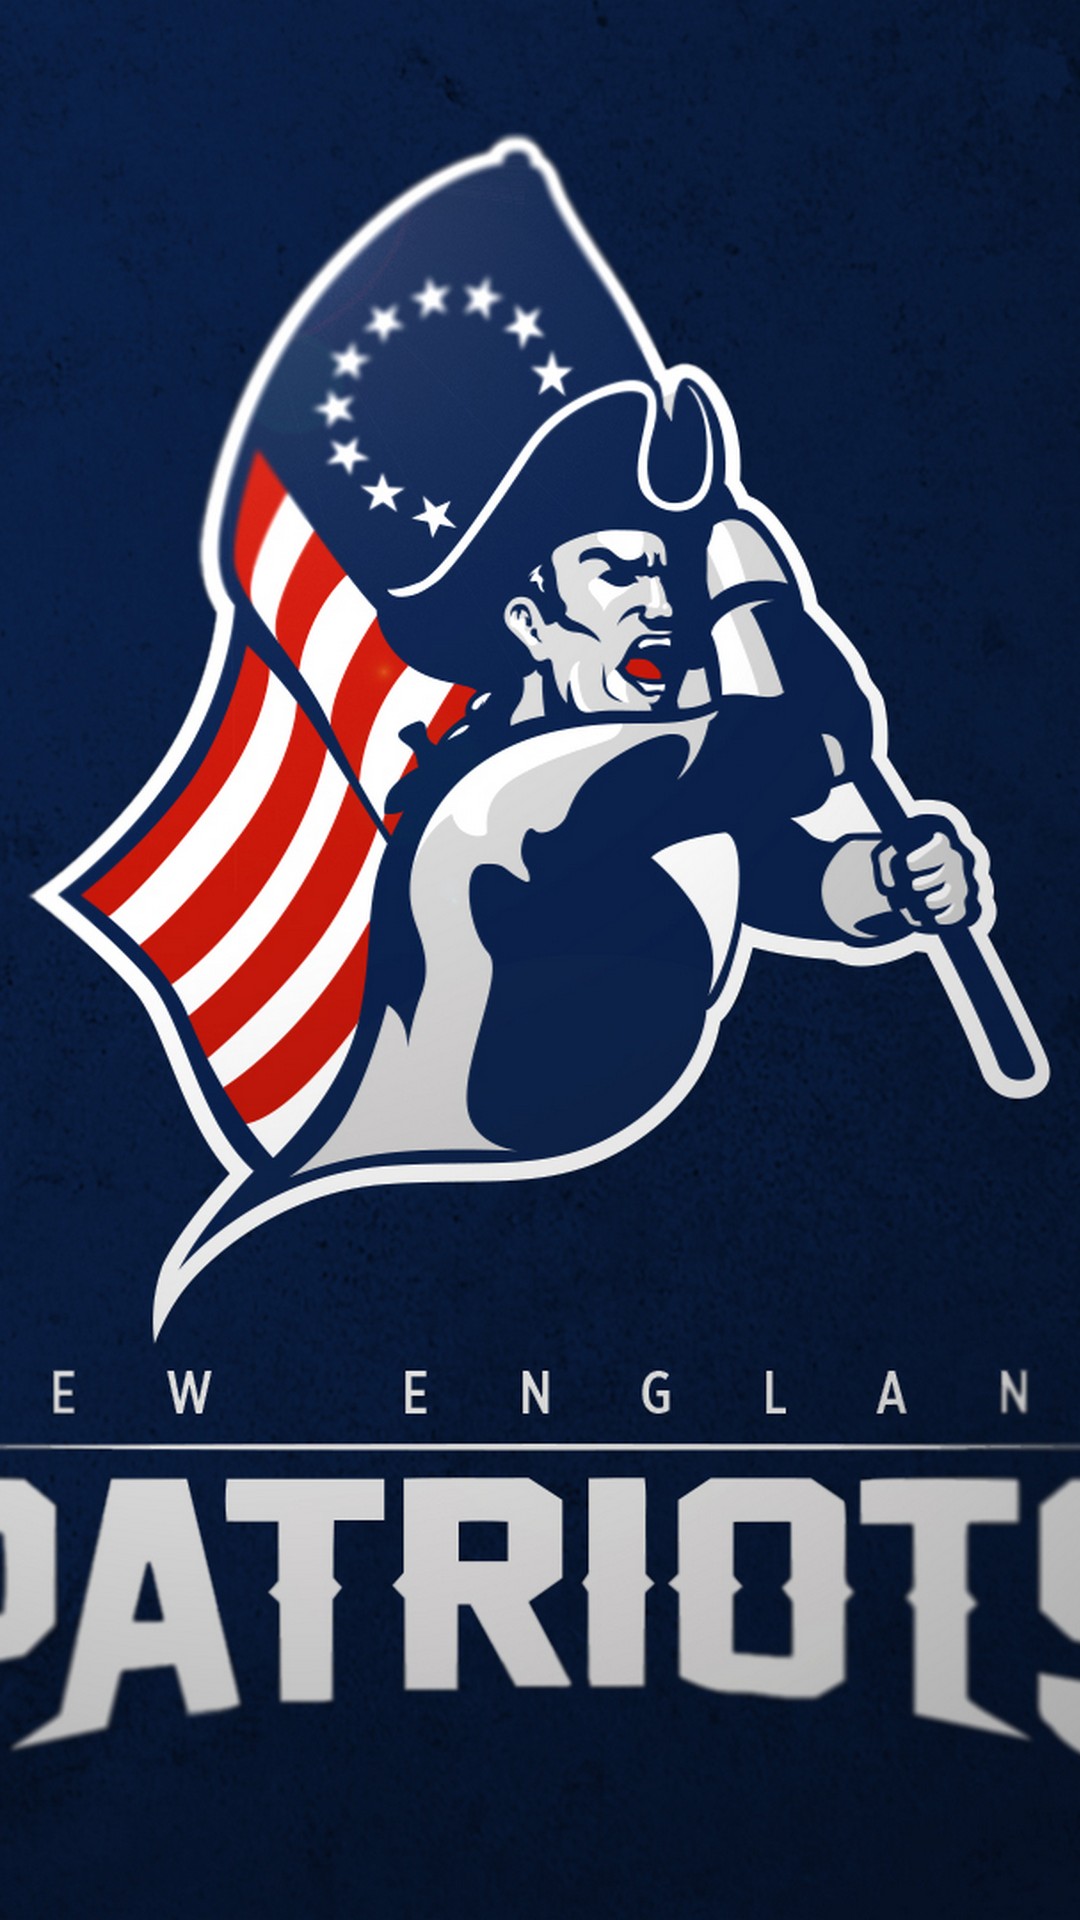 New England Patriots iPhone Wallpaper HD With high-resolution 1080X1920 pixel. Download and set as wallpaper for Apple iPhone X, XS Max, XR, 8, 7, 6, SE, iPad, Android